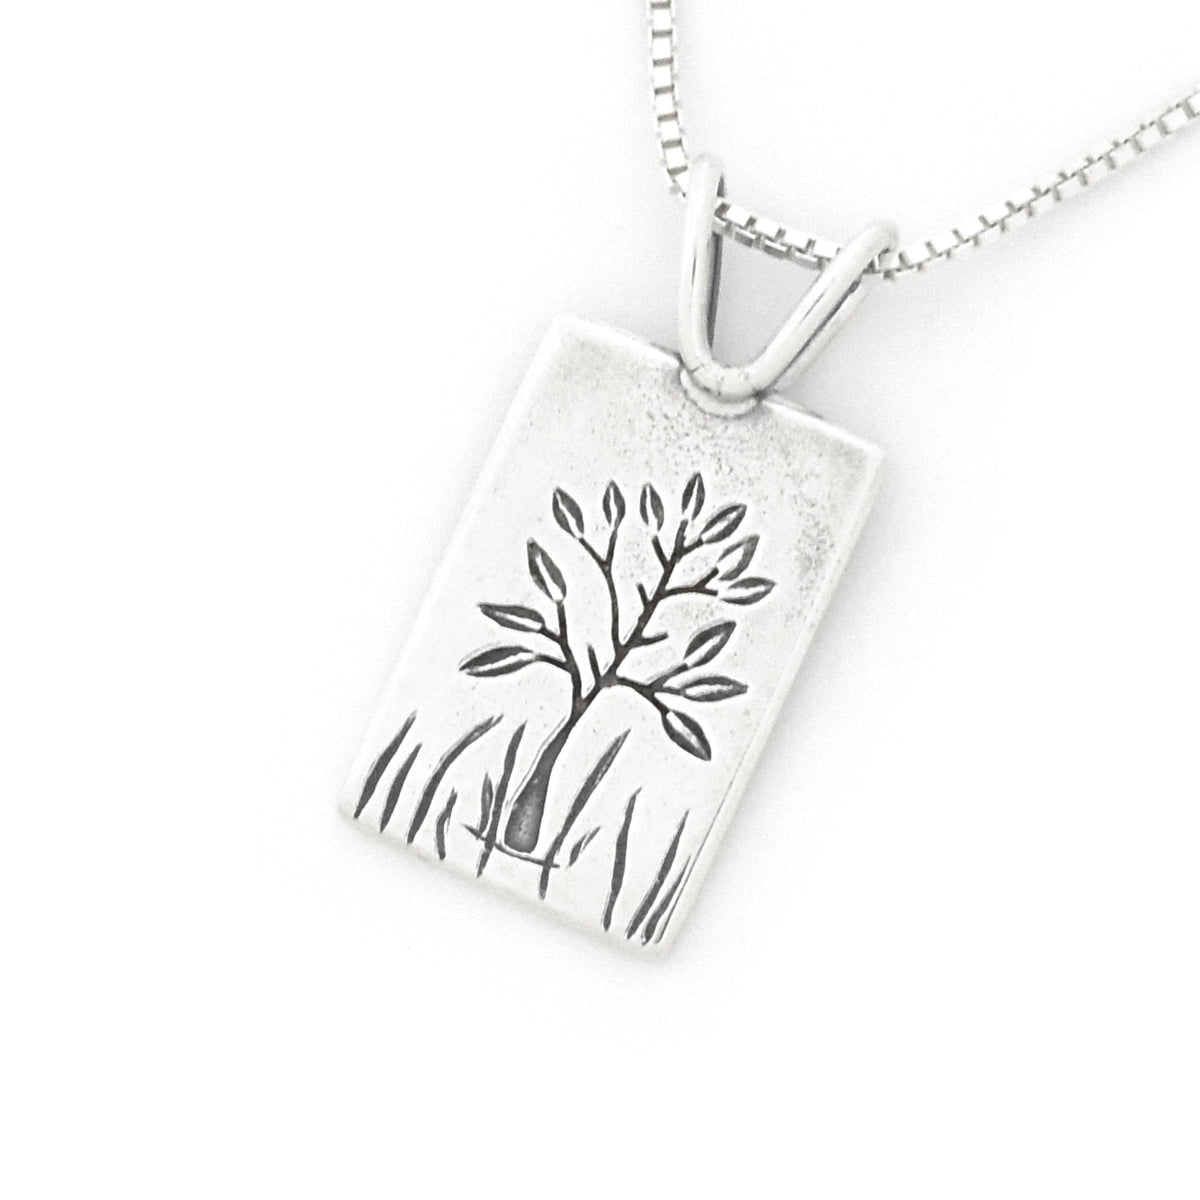 Reversible Small Solstice Tree Pendant - Silver Pendant   7097 - handmade by Beth Millner Jewelry